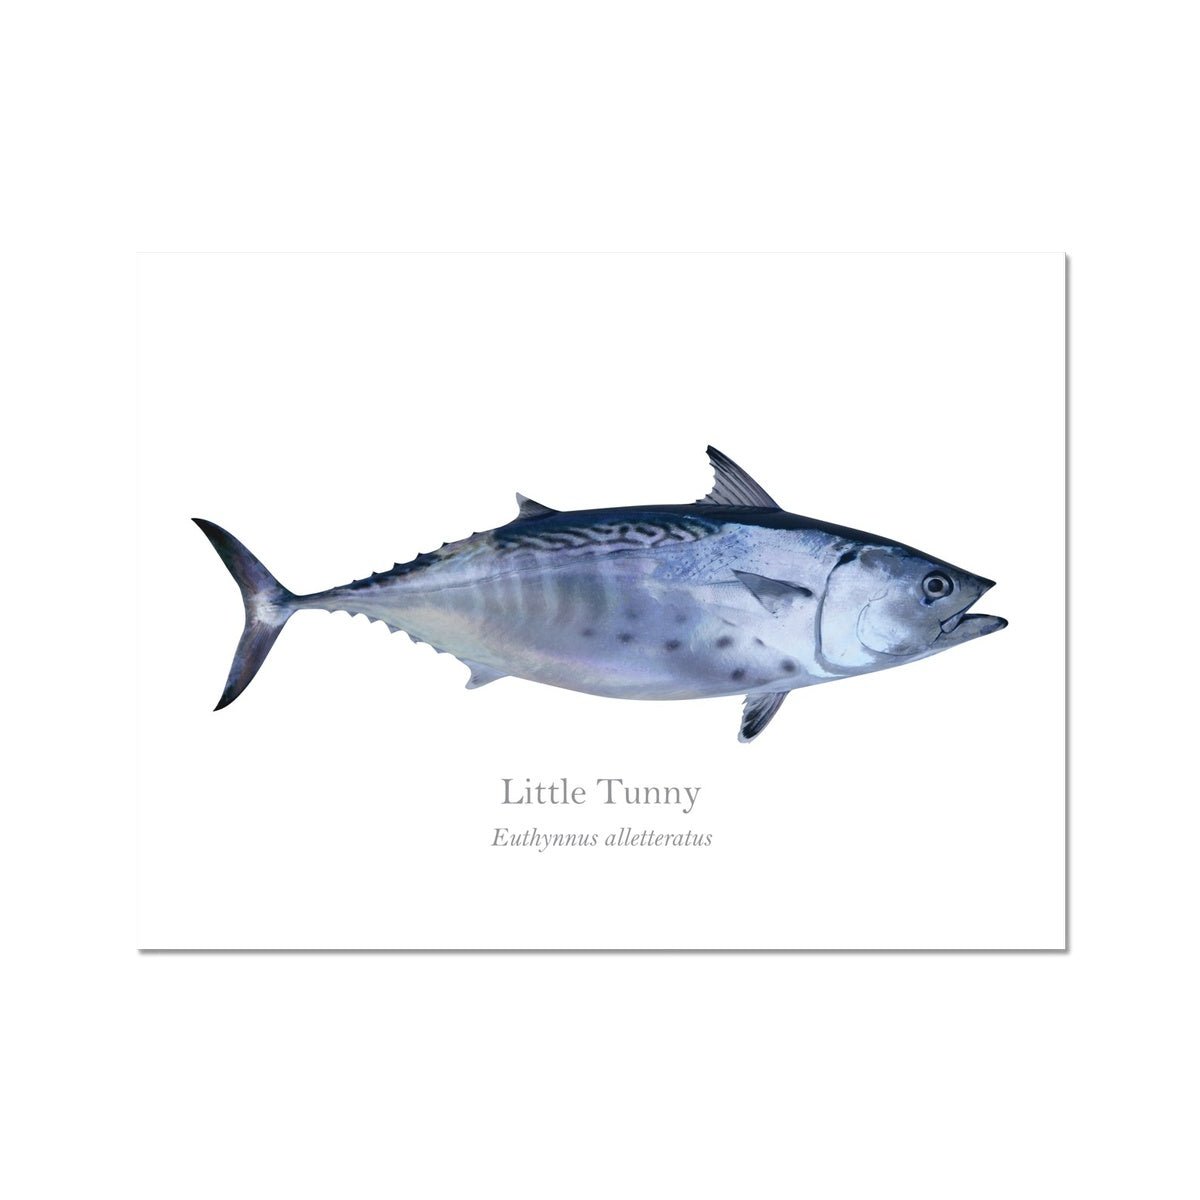 Little Tunny - Art Print - With Scientific Name - madfishlab.com